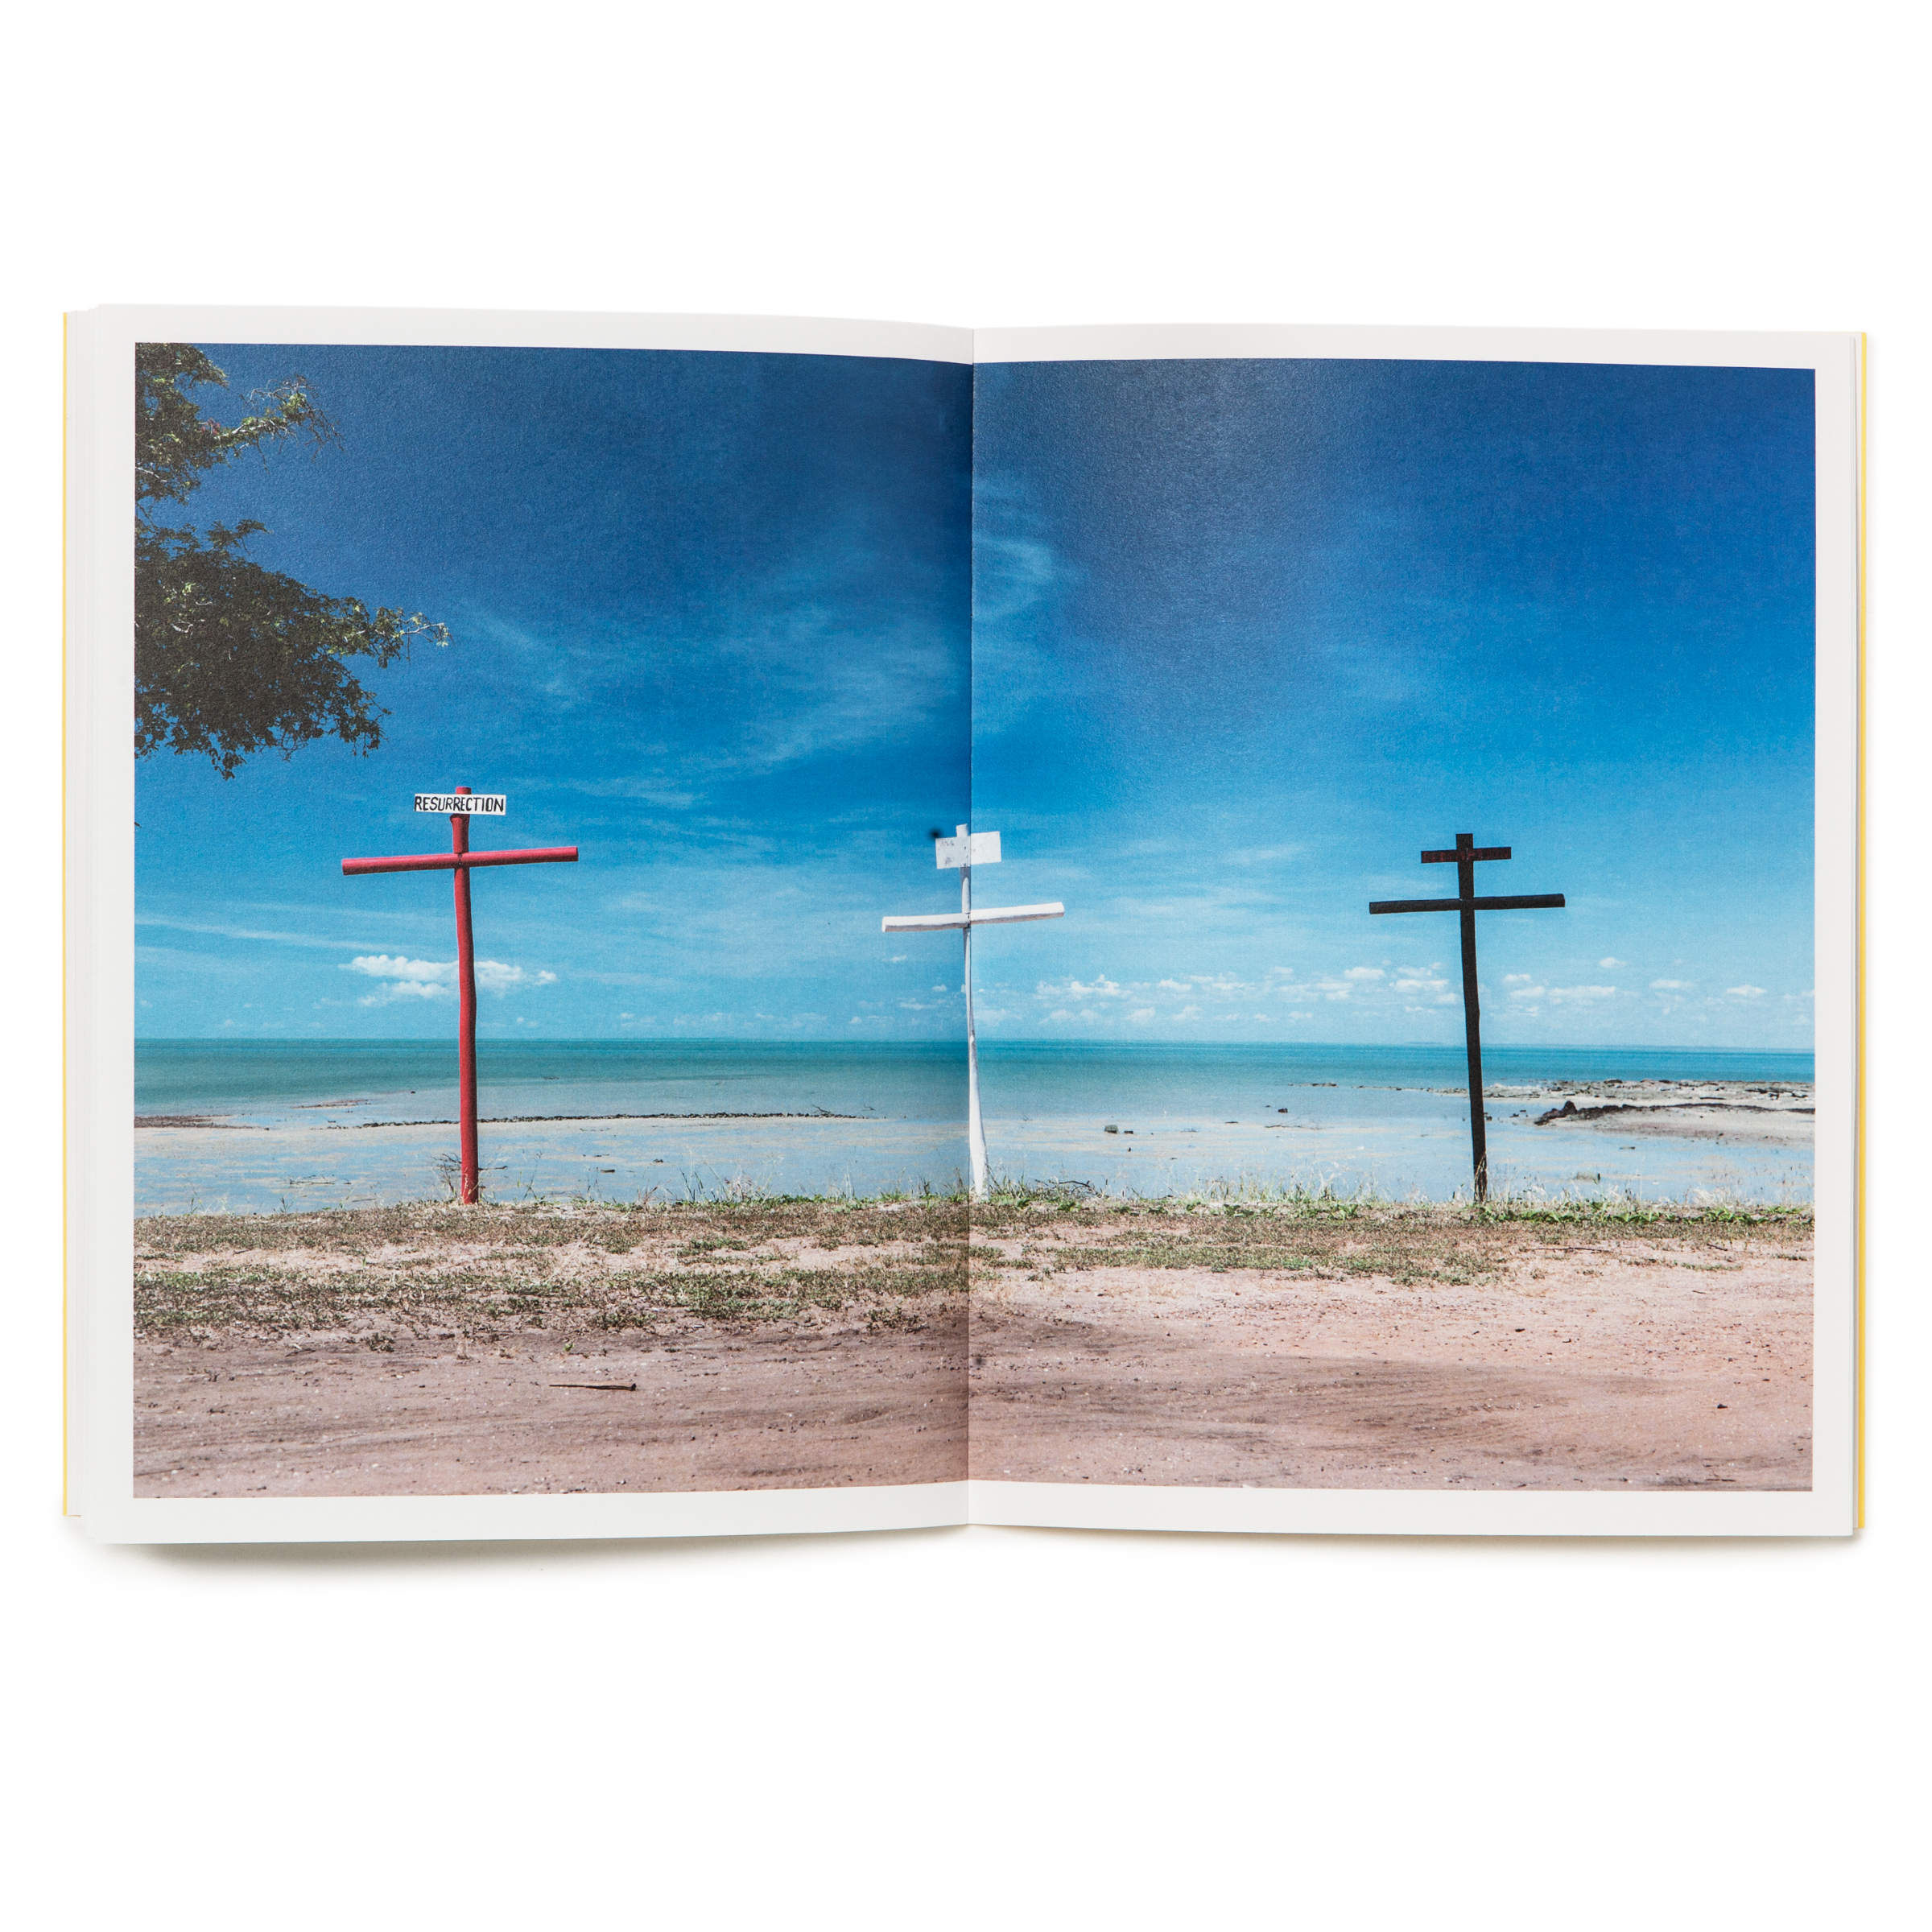 The launch of Melbourne-based photographer Tim Hillier's new book North of the South